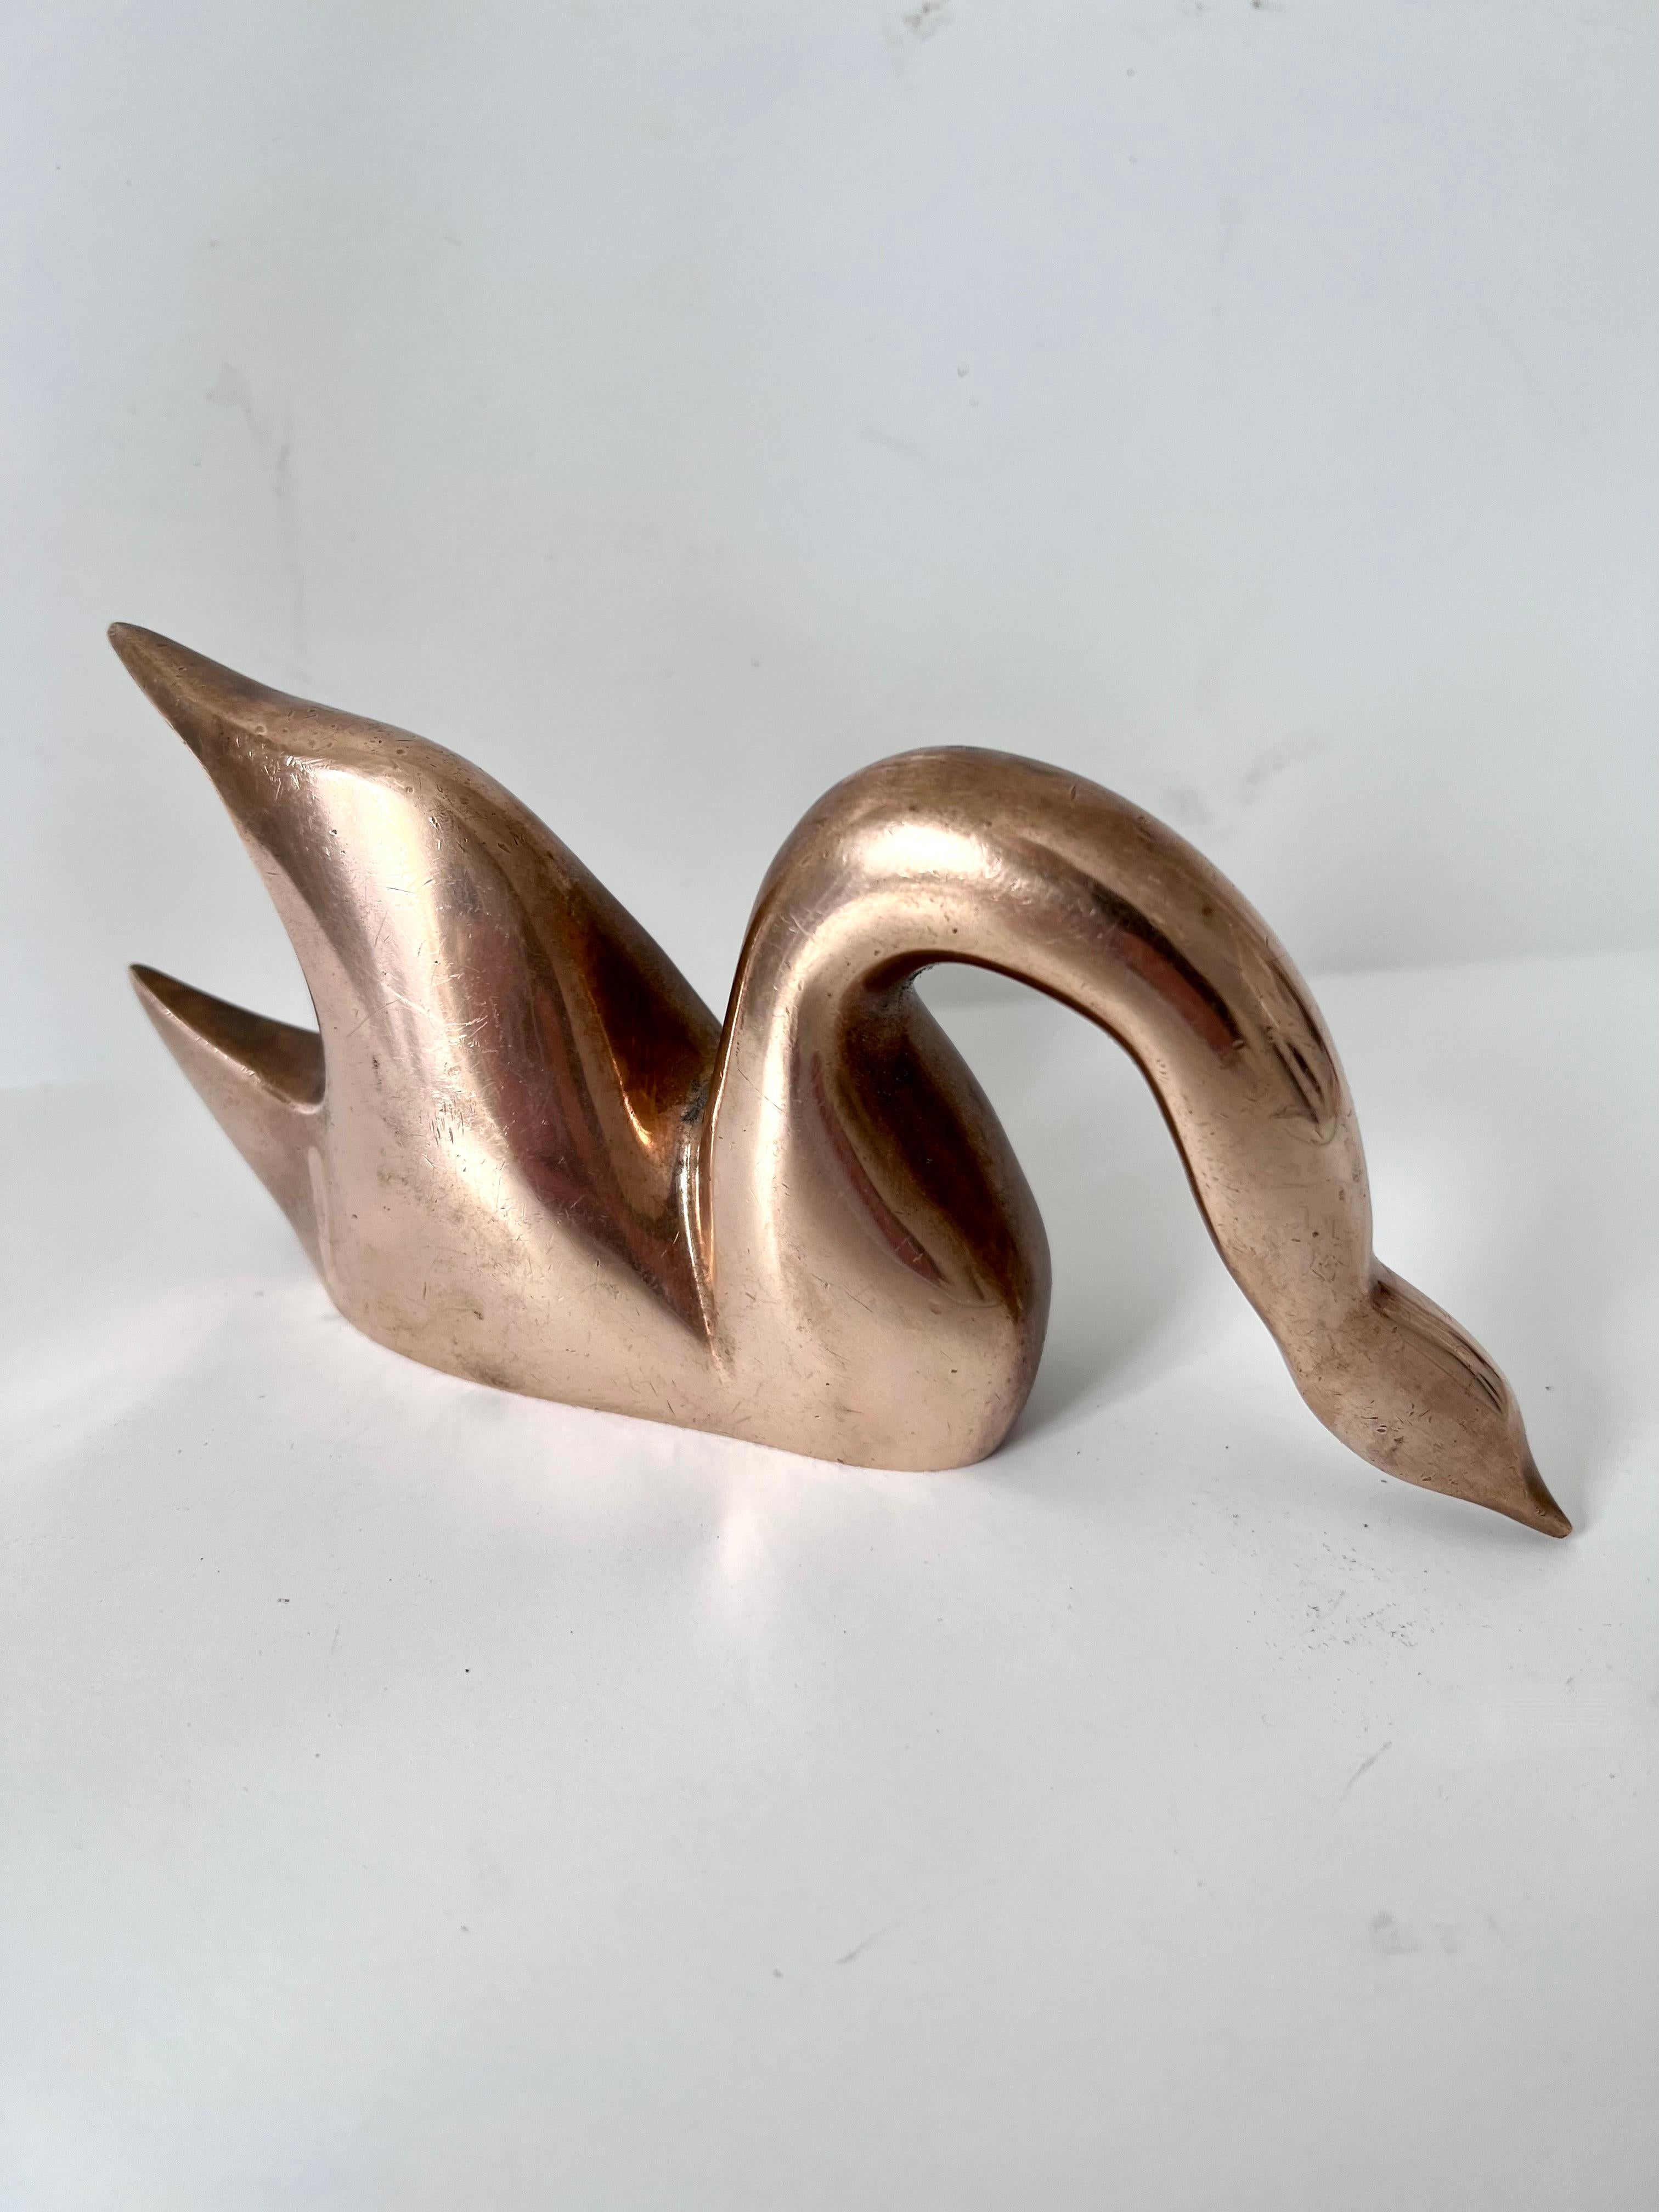 Acquired in Paris, France, a beautifully designed and sculpted bronze figure of a bird. A wonderful paperweight or stand alone sculpture. A compliment to any shelf or work station.